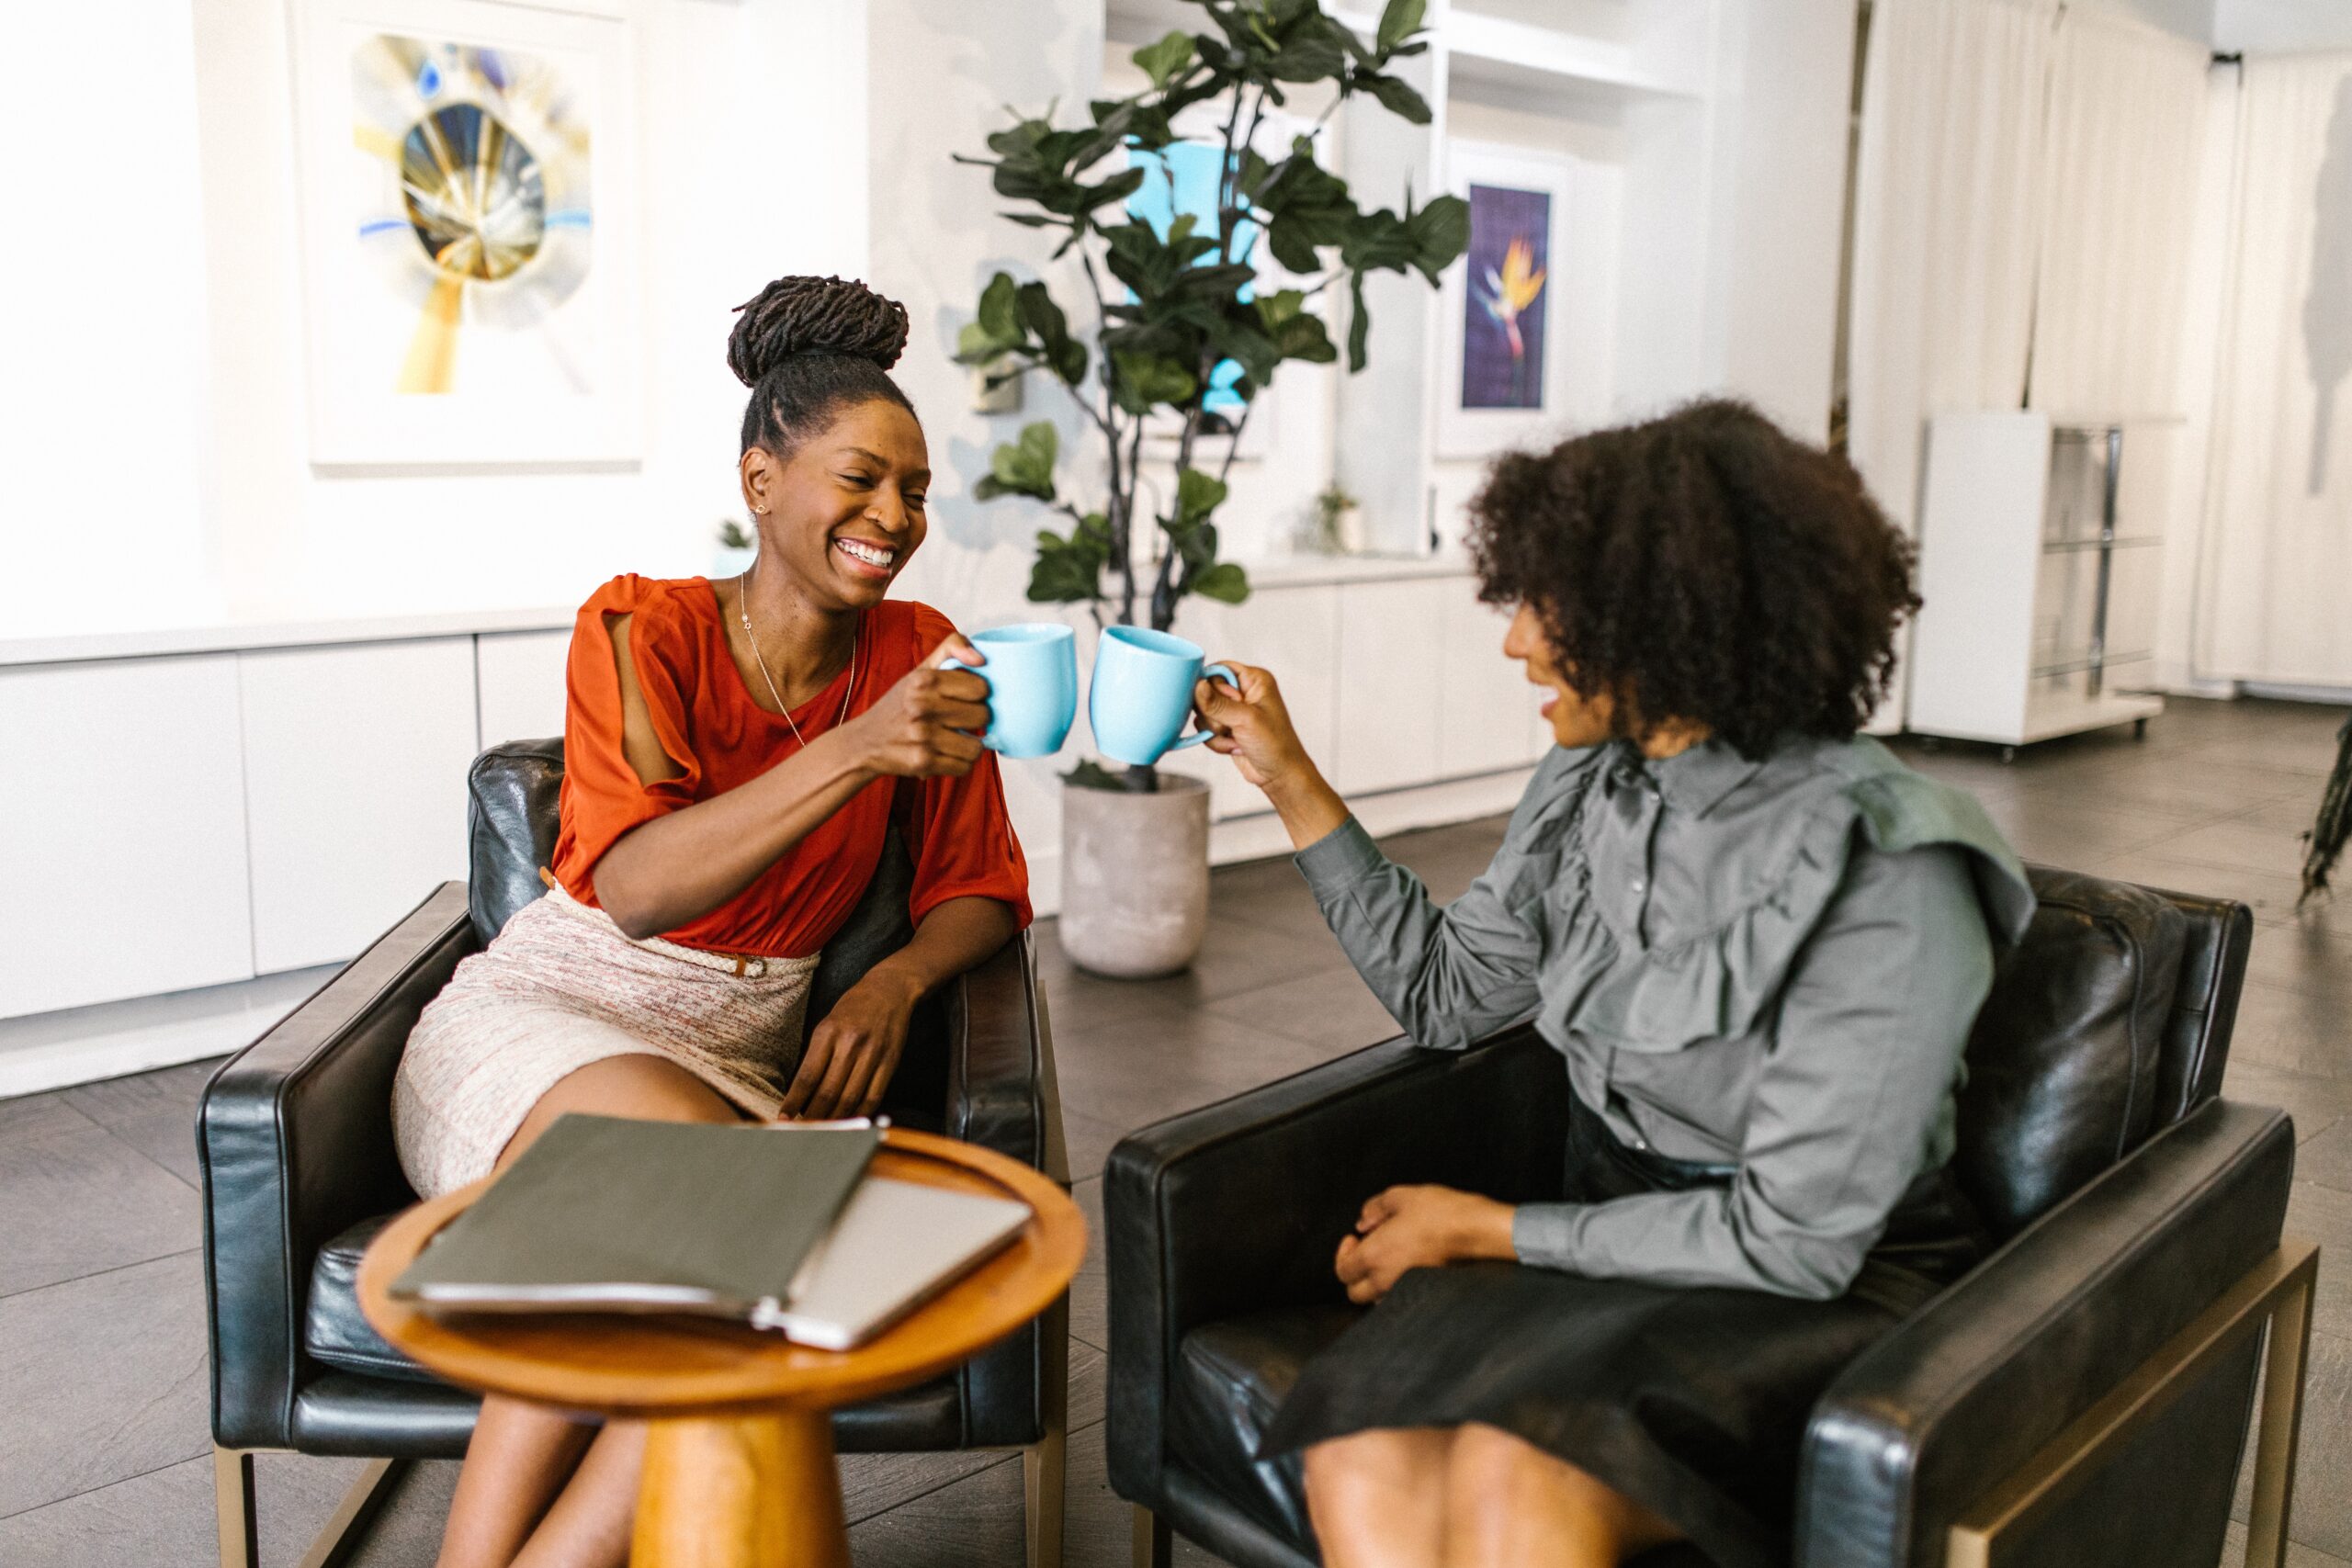 Two smiling women sitting on sofa chairs and toasting their blue coffee mugs.